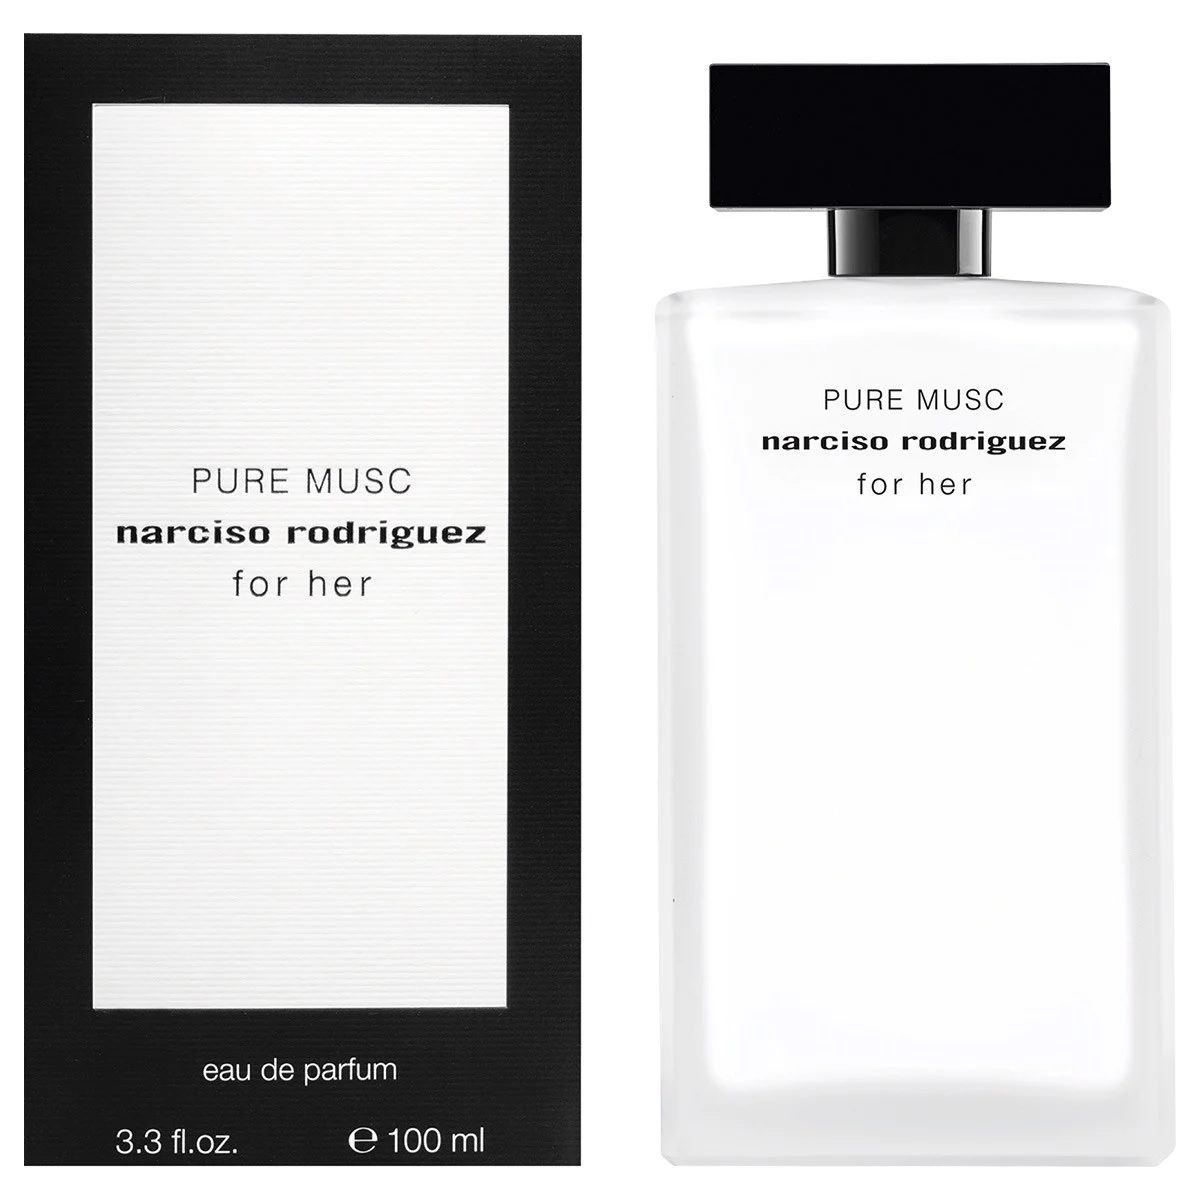 Thiết kế bắt mắt của Nước Hoa Narciso Rodriguez For Her Pure Musc